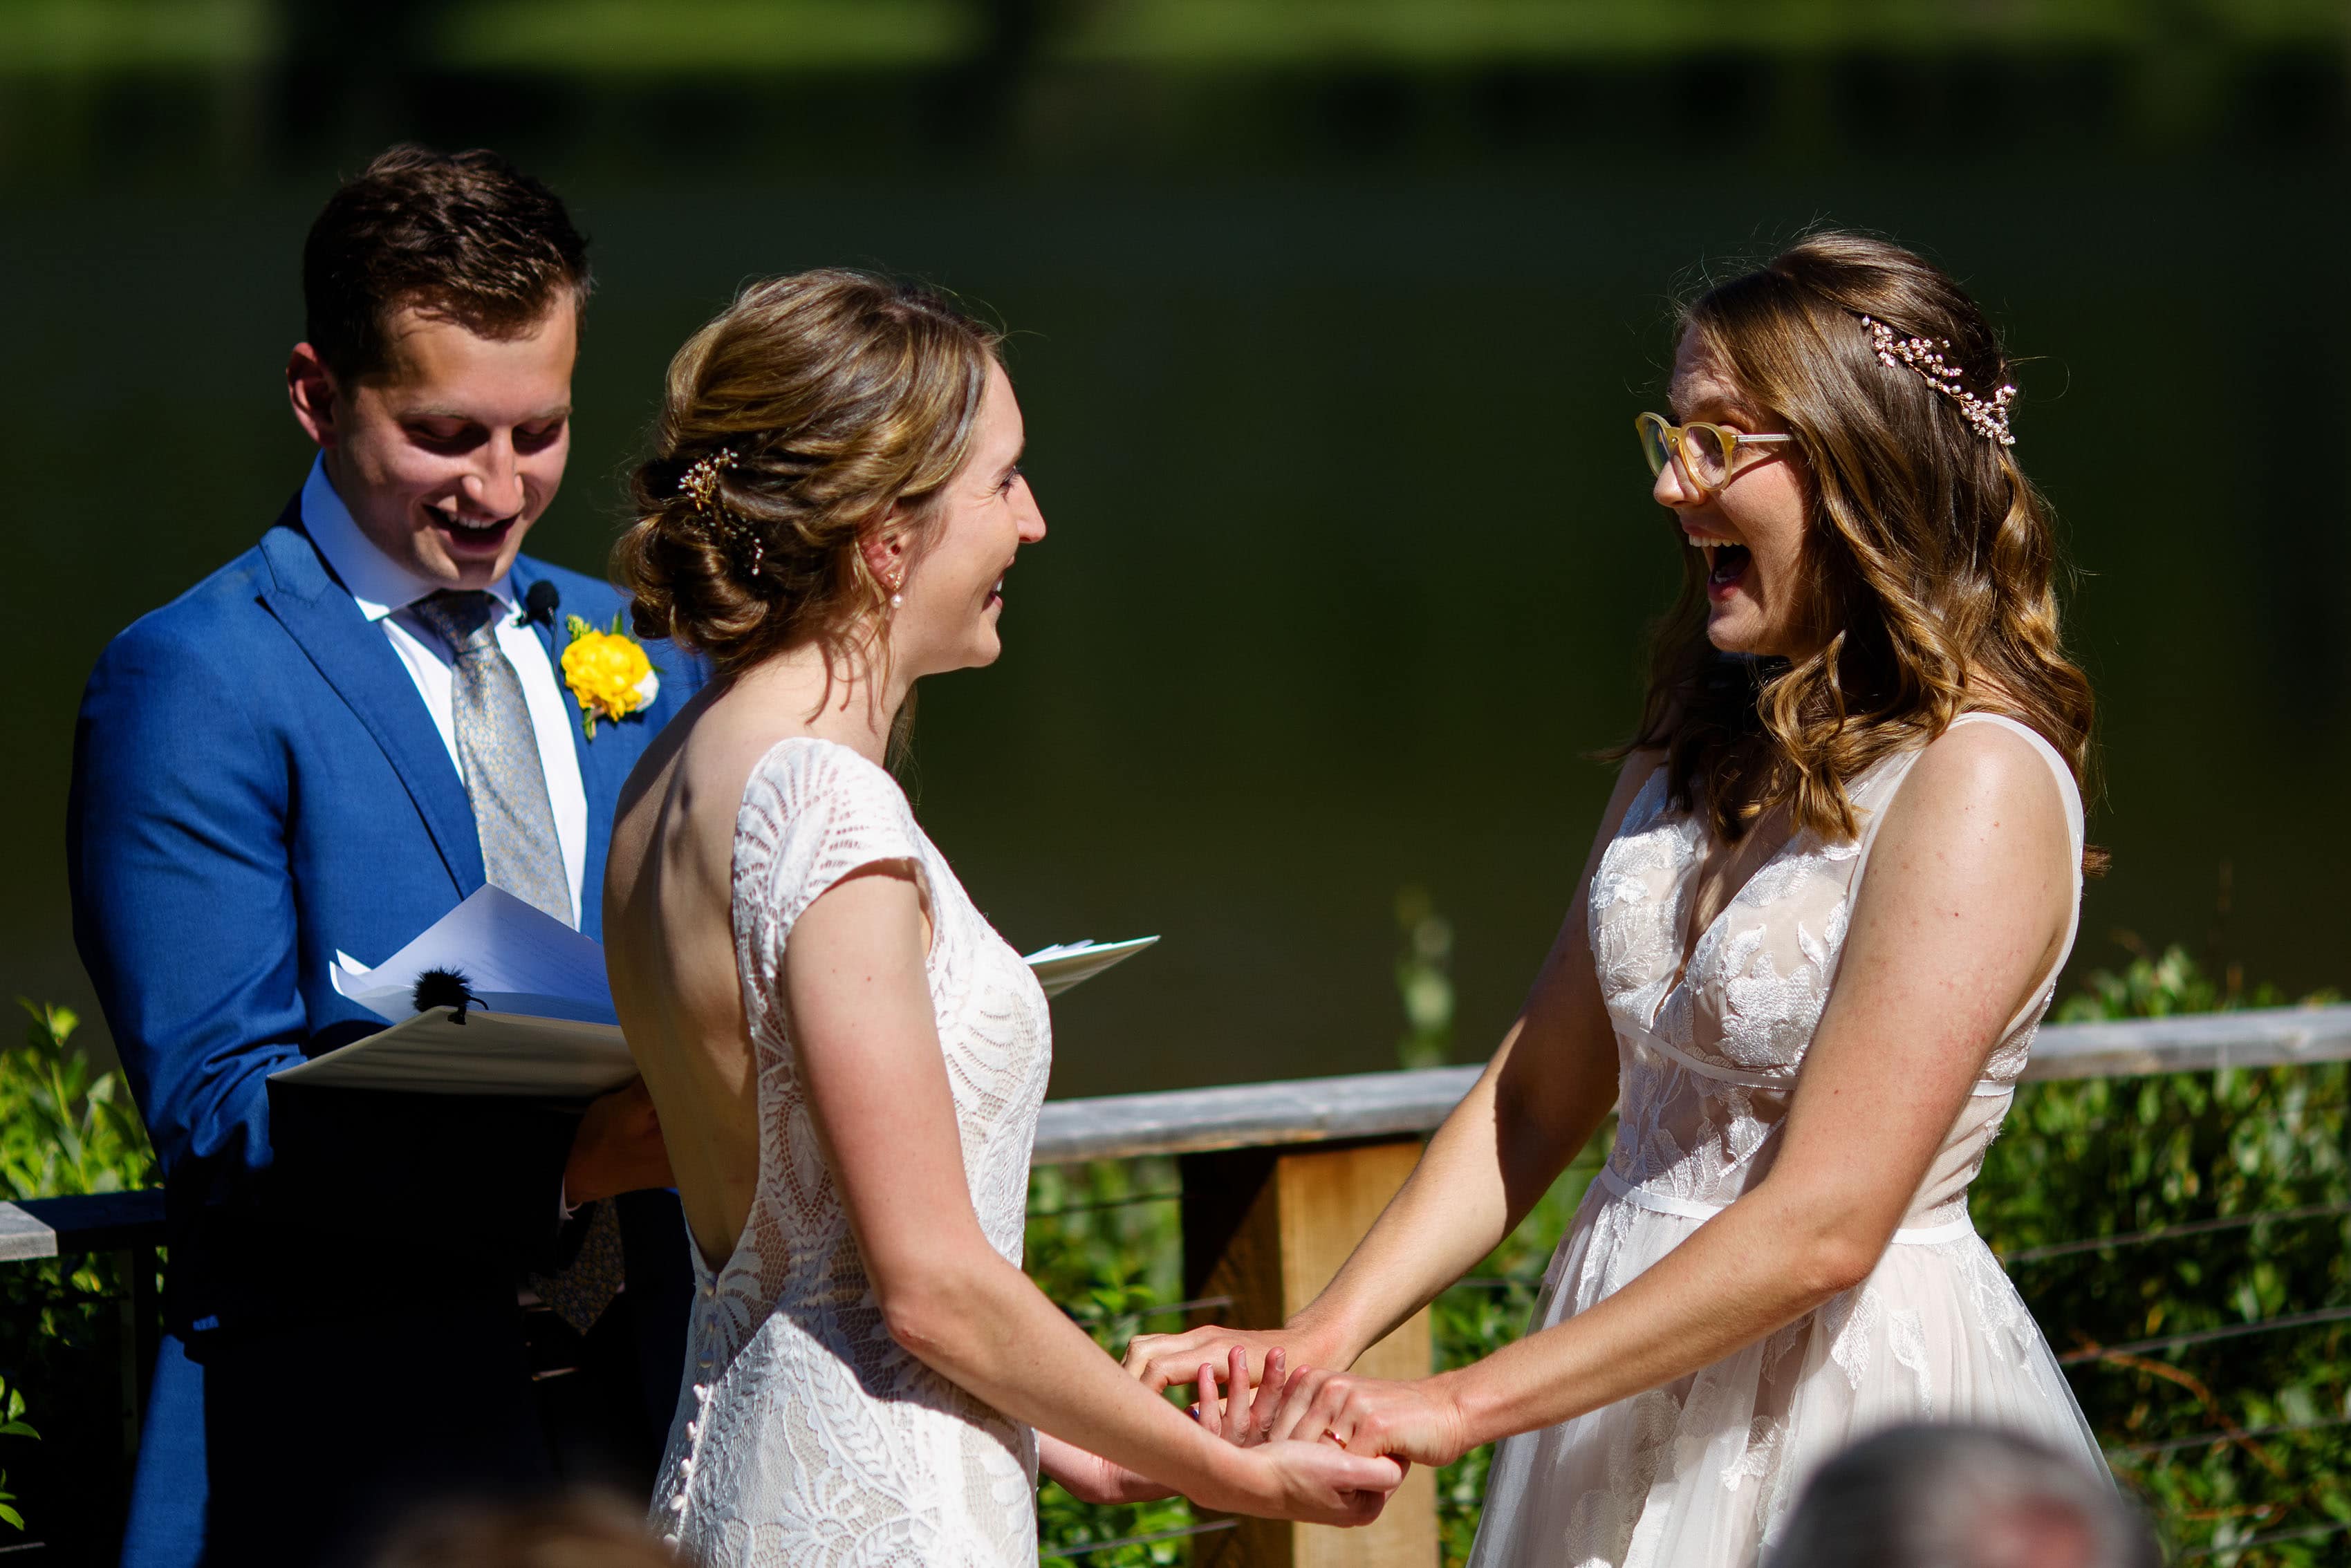 The brides react during the ceremony together